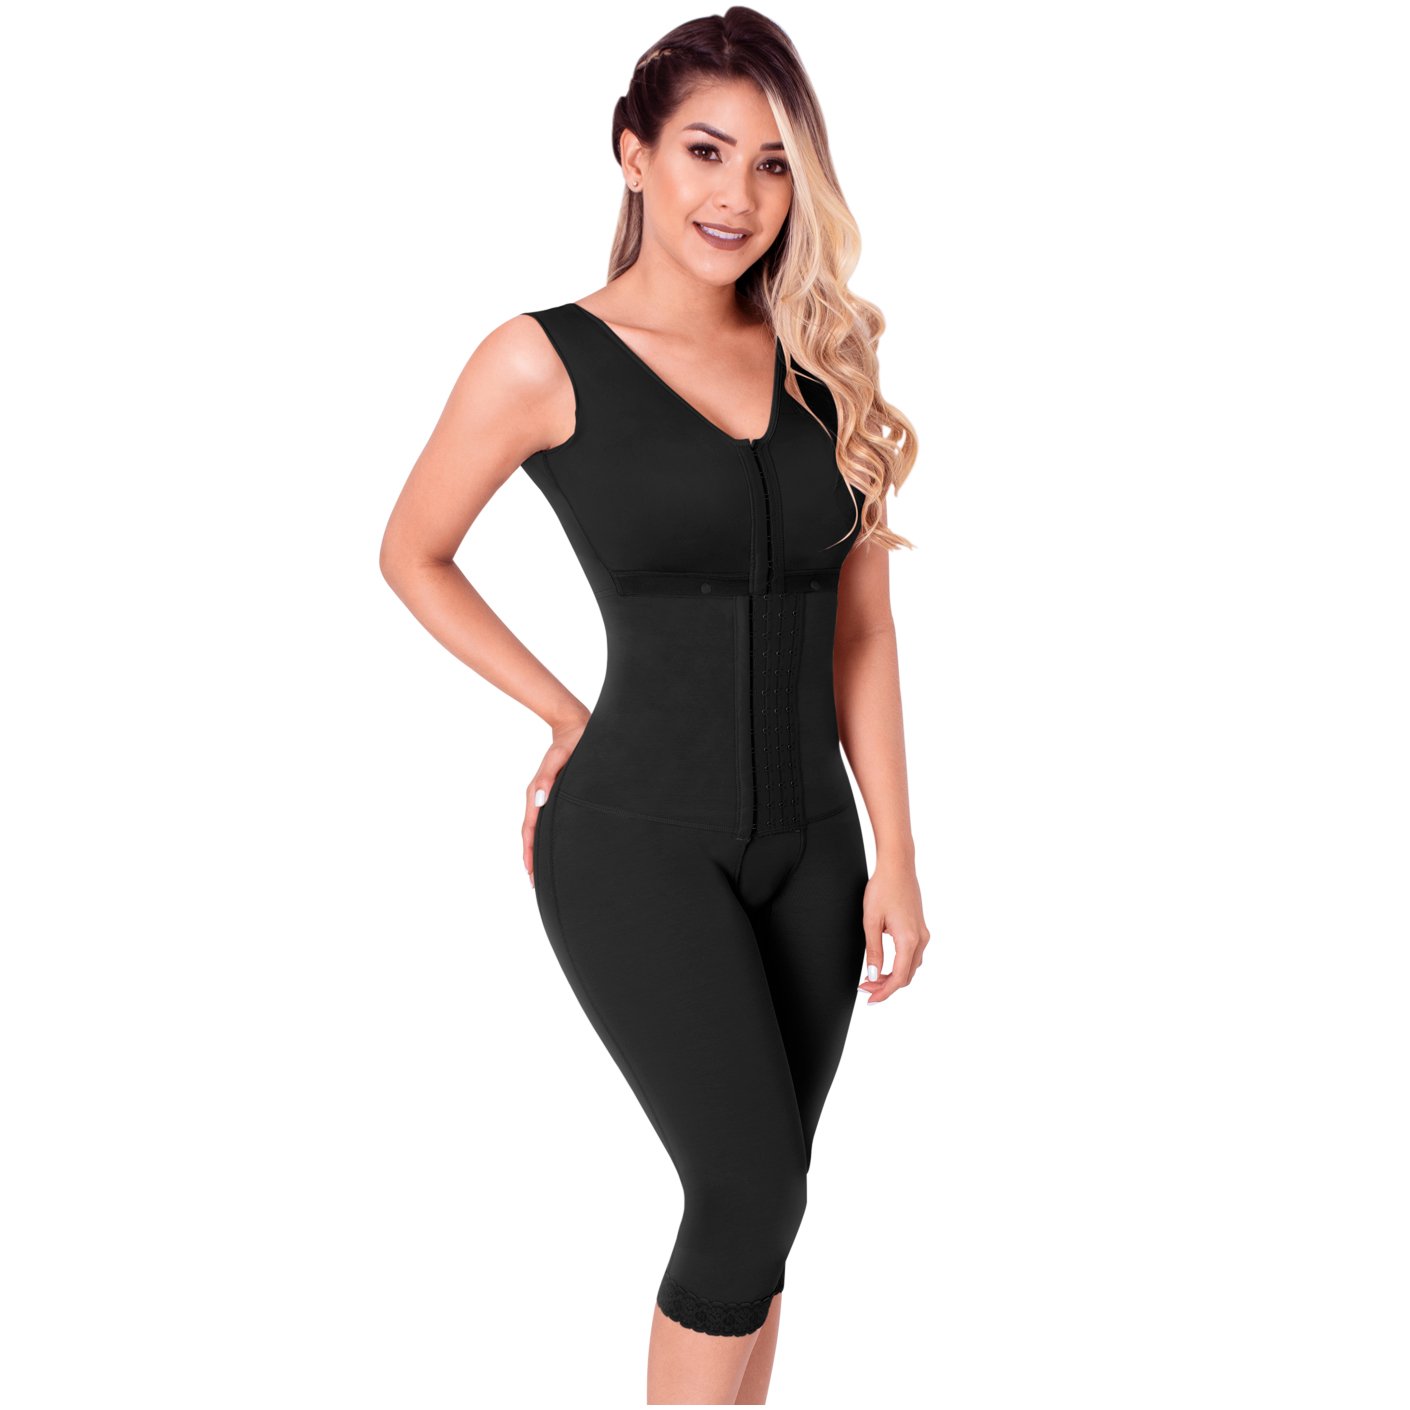 SONRYSE 052BF | Full Body Shaper for Post Surgery with Built-in Bra | Butt Lifting Effect and Tummy Control - fajacolombian